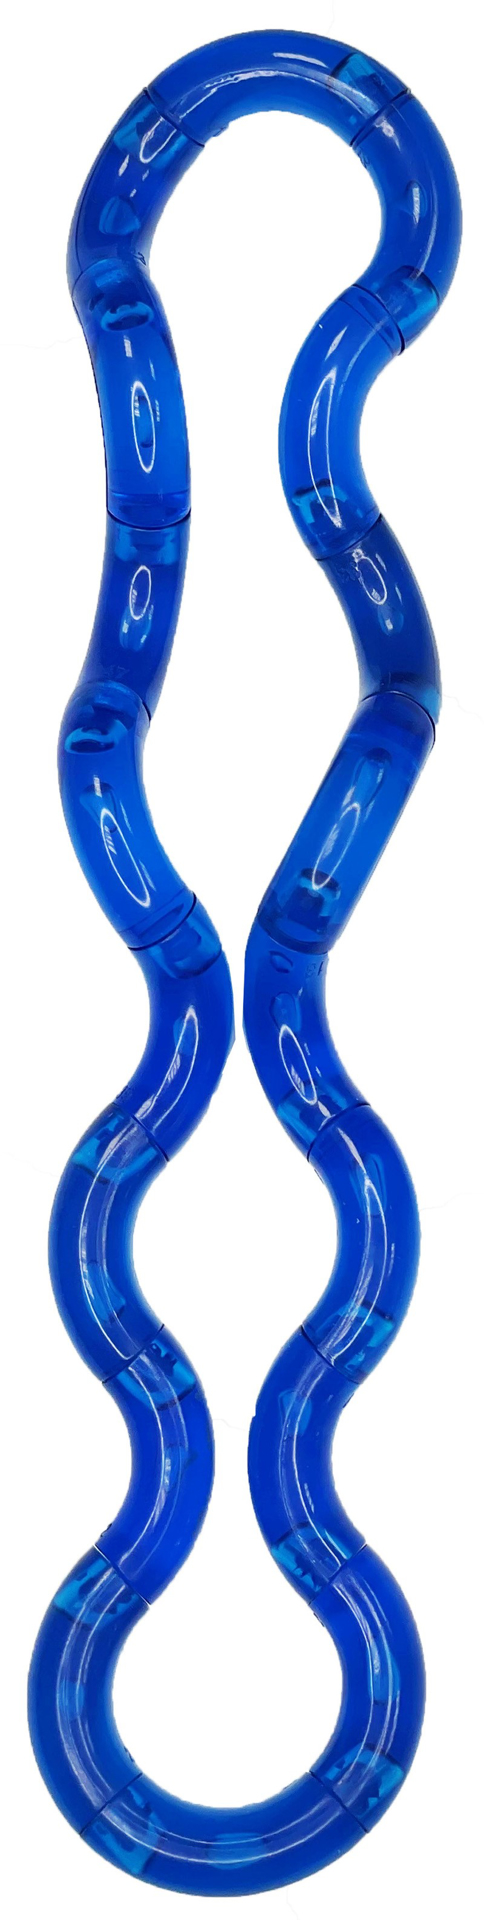 Translucent Blue Tangle laid out